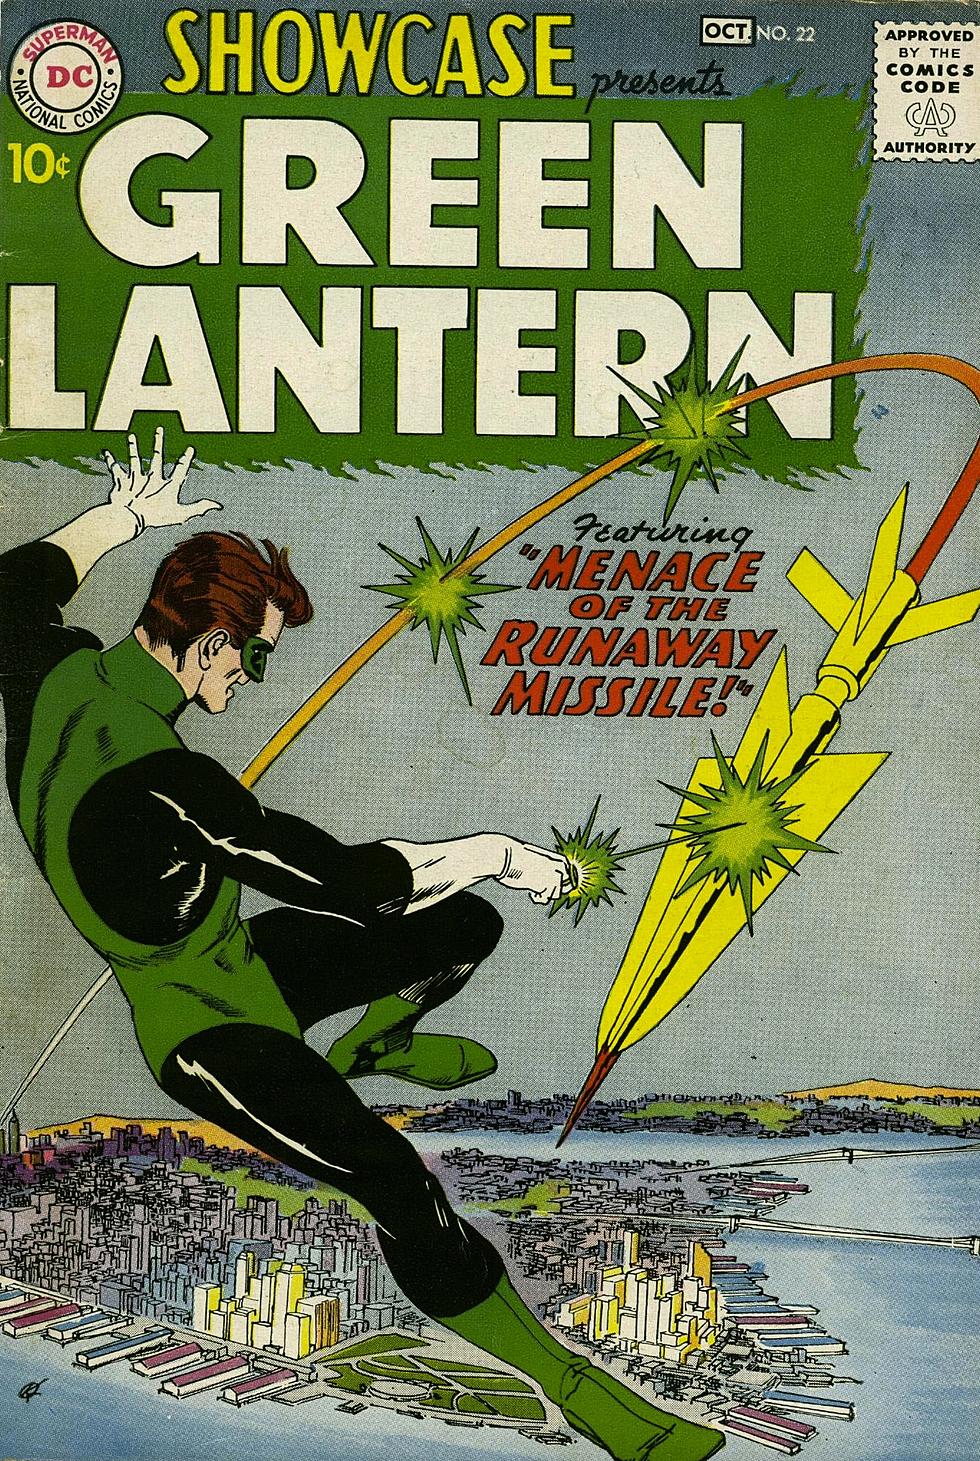 Today In Comics History: The First Appearance of Hal Jordan